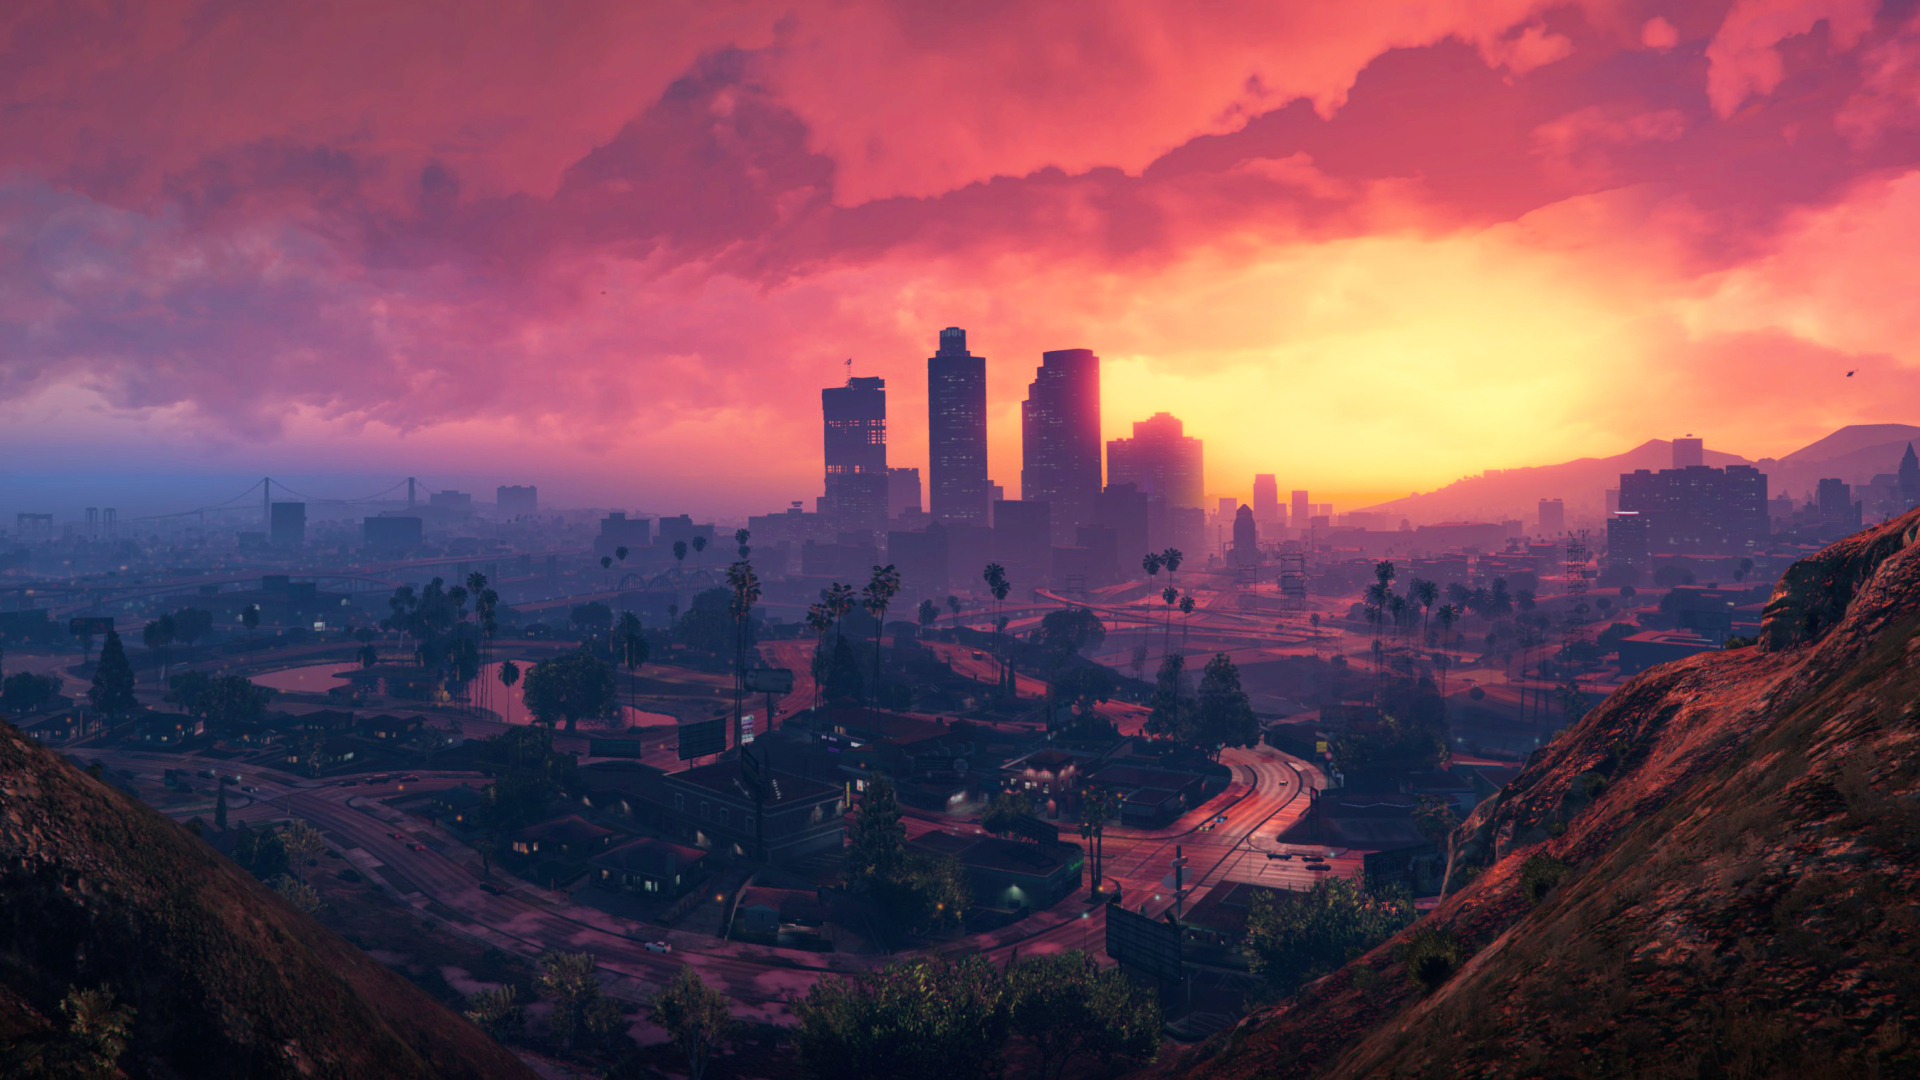 4K Grand Theft Auto V Scenery Image, HD Nature 4K Wallpapers, Images